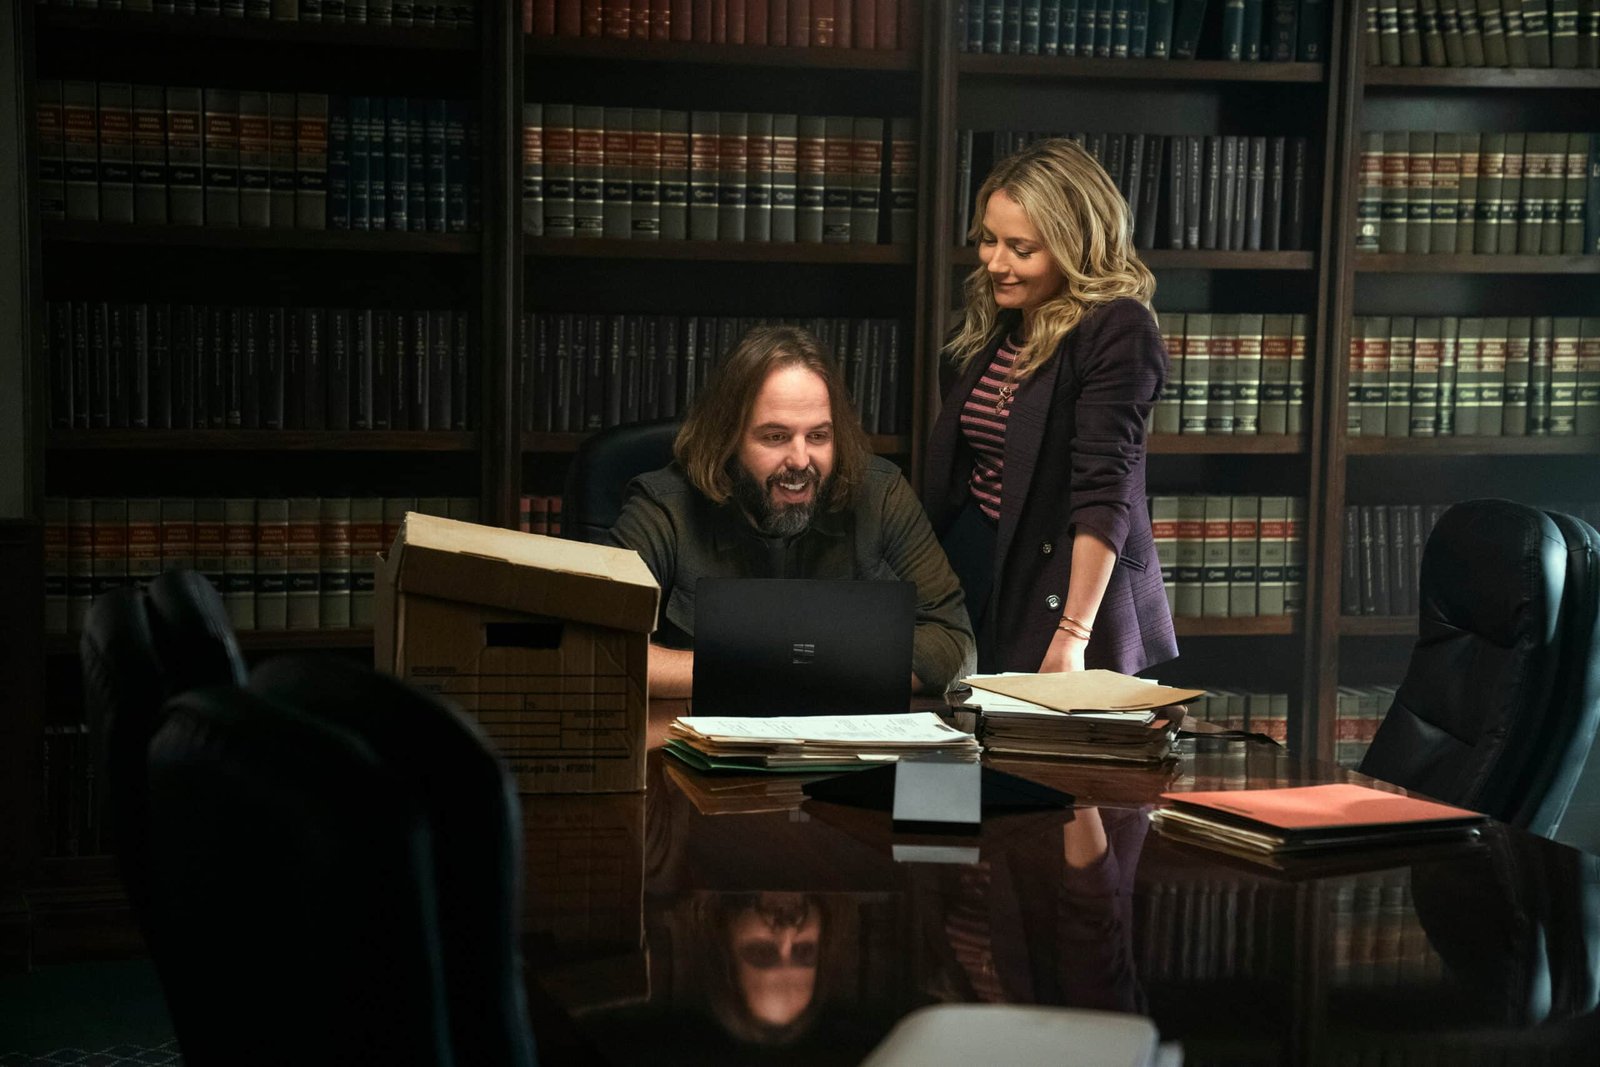 Angus Sampson as Cisco and Becki Newton as Lorna in The Lincoln Lawyer